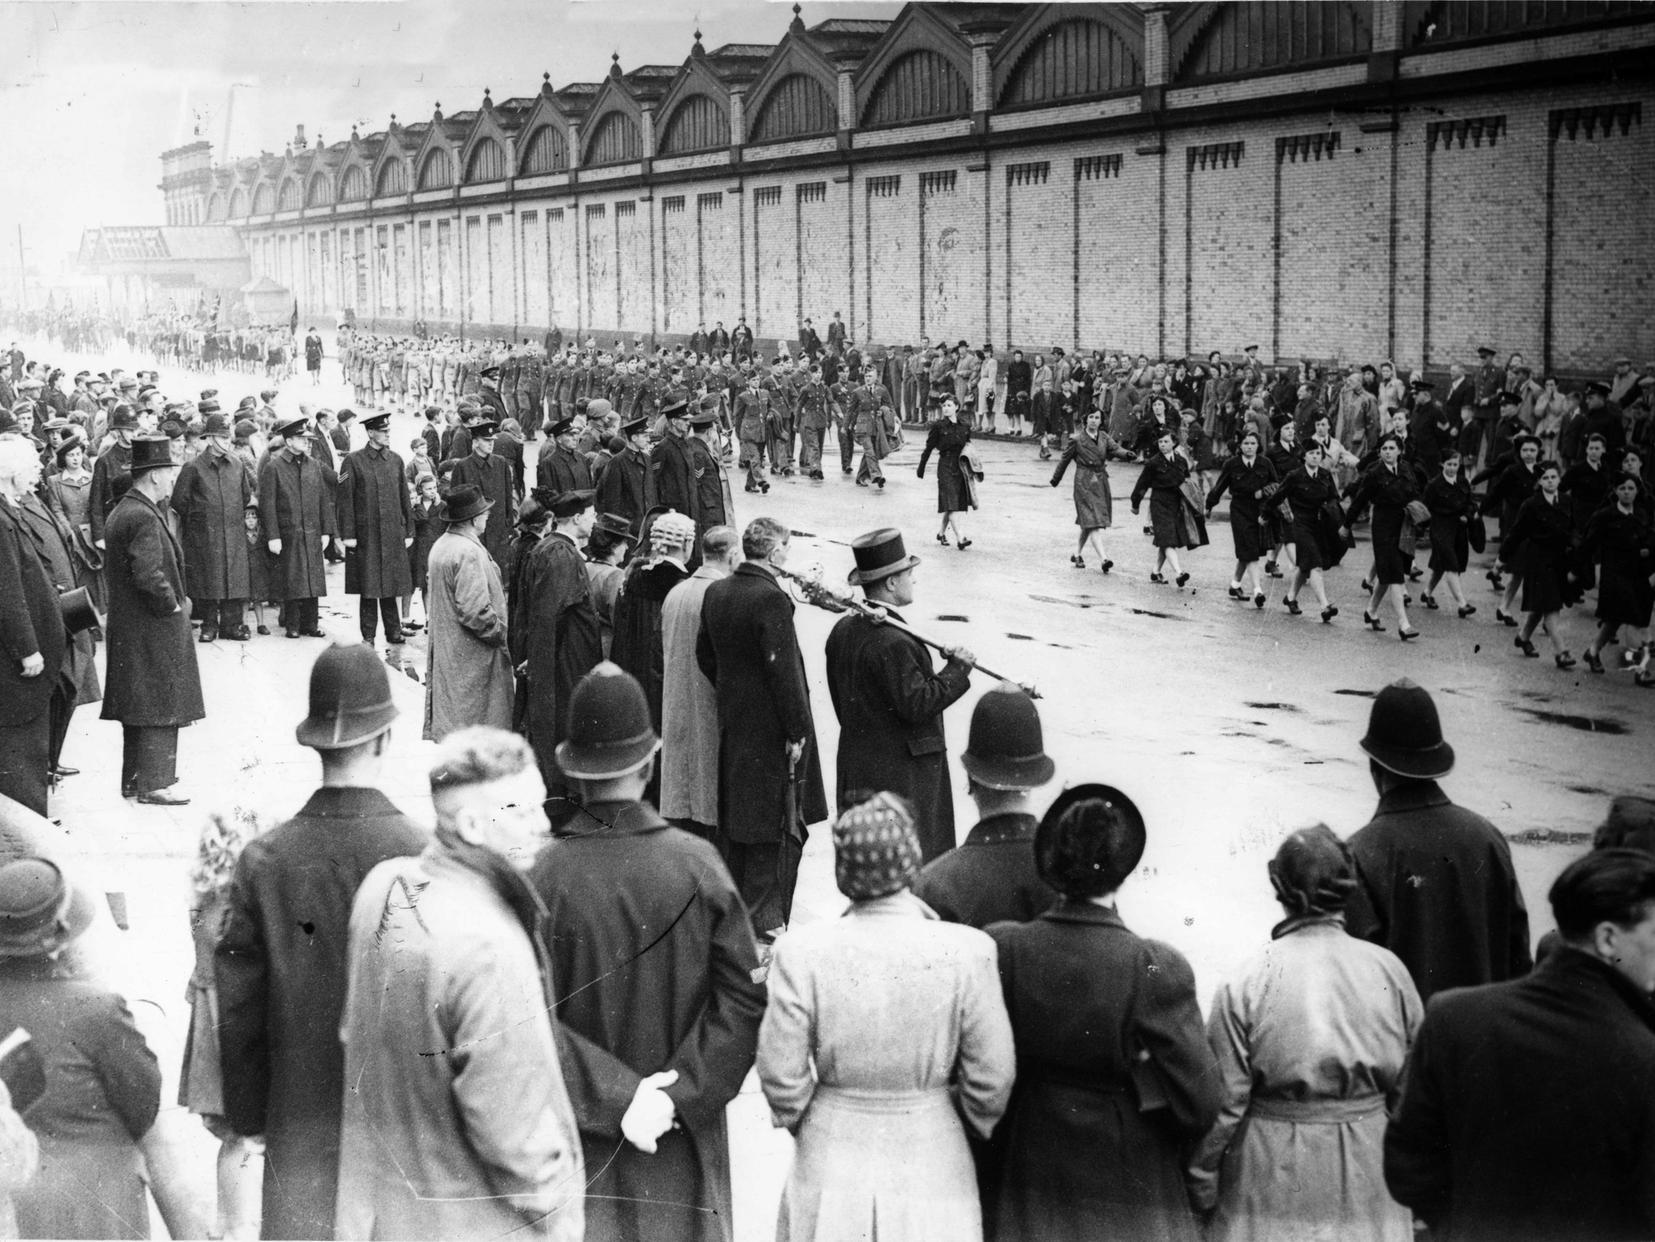 Fleetwoods VE Day parade which marched alongside Fleetwood Railway Station